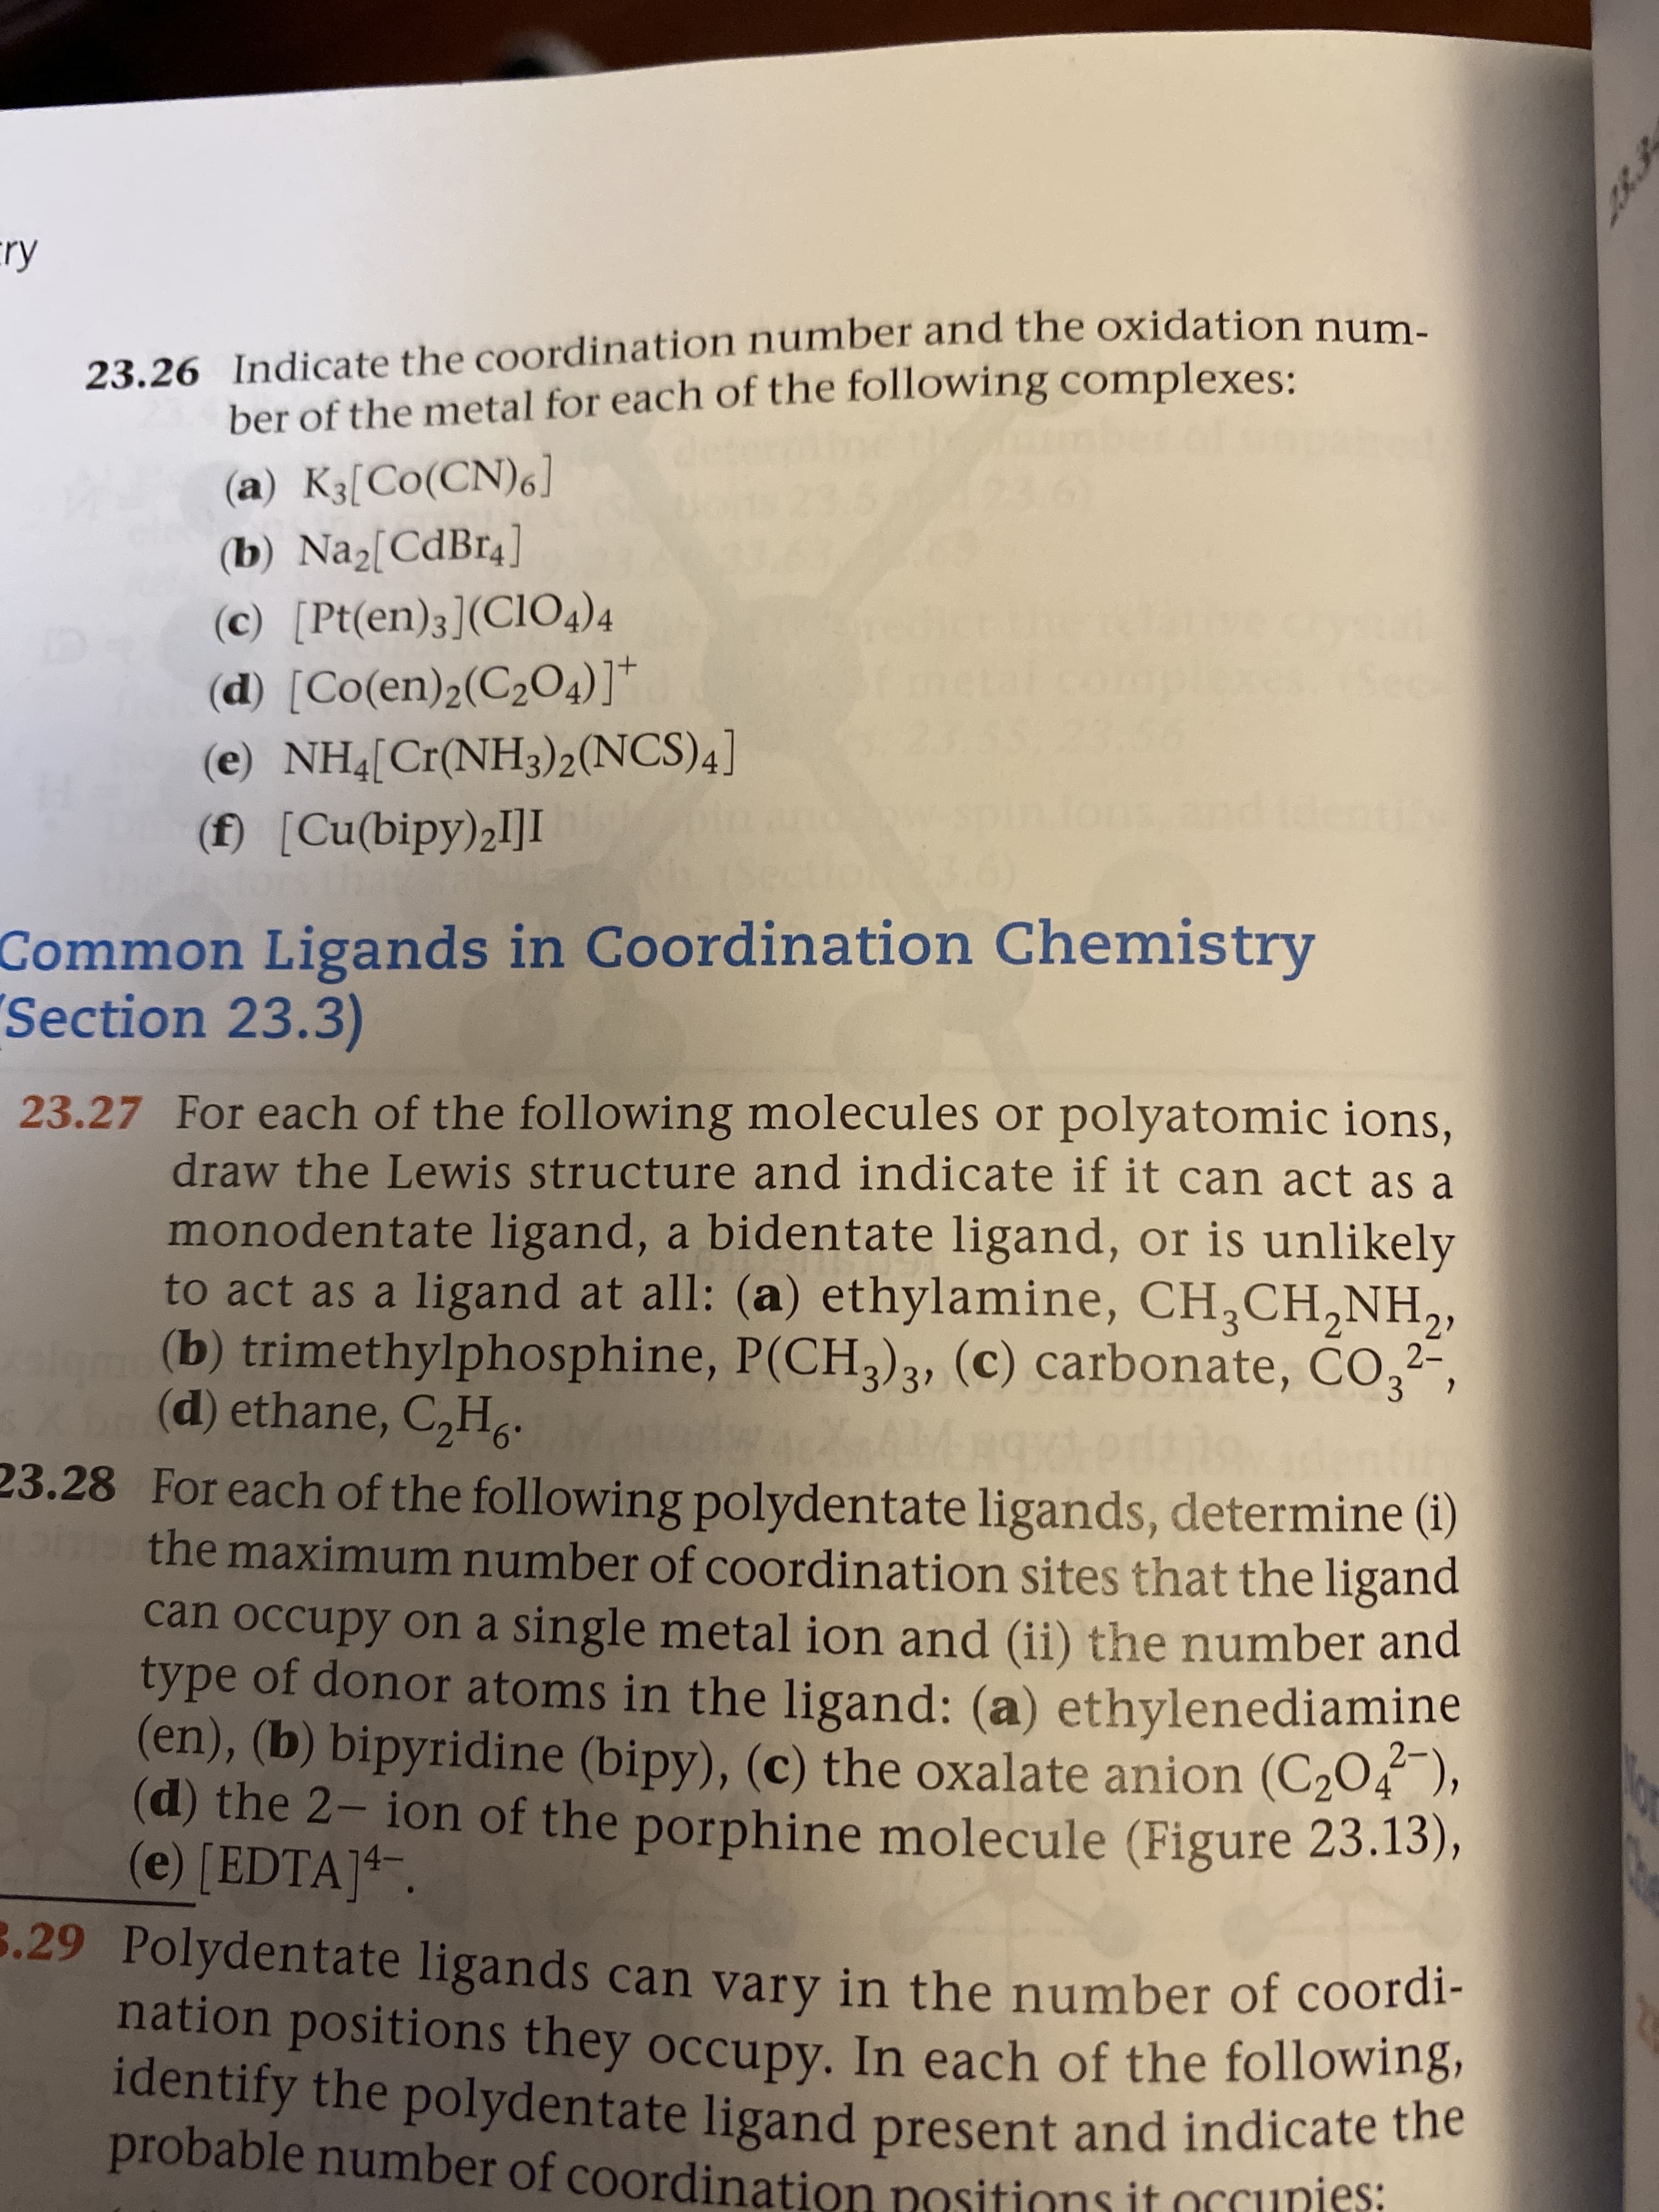 cry
23.26 Indicate the coordination number and the oxidation num.
ber of the metal for each of the following complexes:
(a) K3[Co(CN)6]
(b) Na[CdBr4]
(c) [Pt(en)3](Cl04)4
(d) [Co(en)2(C204)]*
(e) NH4[Cr(NH3)2(NCS)4]
(f) [Cu(bipy)2I]I
Common Ligands in Coordination Chemistry
Section 23.3)
23.27 For each of the following molecules or polyatomic ions,
draw the Lewis structure and indicate if it can act as a
monodentate ligand, a bidentate ligand, or is unlikely
to act as a ligand at all: (a) ethylamine, CH,CH,NH,
(b) trimethylphosphine, P(CH,)3, (c) carbonate, CO,2-
ale
(d) ethane, C,H,
23.28 For each of the following polydentate ligands, determine (1)
ph the maximum number of coordination sites that the ligand
can occupy on a single metal ion and (ii) the number and
type of donor atoms in the ligand: (a) ethylenediamine
(en), (b) bipyridine (bipy), (c) the oxalate anion (C2O4),
(d) the 2- ion of the porphine molecule (Figure 23.13),
(e) [EDTA]4.
3.29 Polydentate ligands can vary in the number of coordi-
nation positions they occupy. In each of the following,
identify the polydentate ligand present and indicate the
probable number of coordination positions it orcunies:
Z8.3
